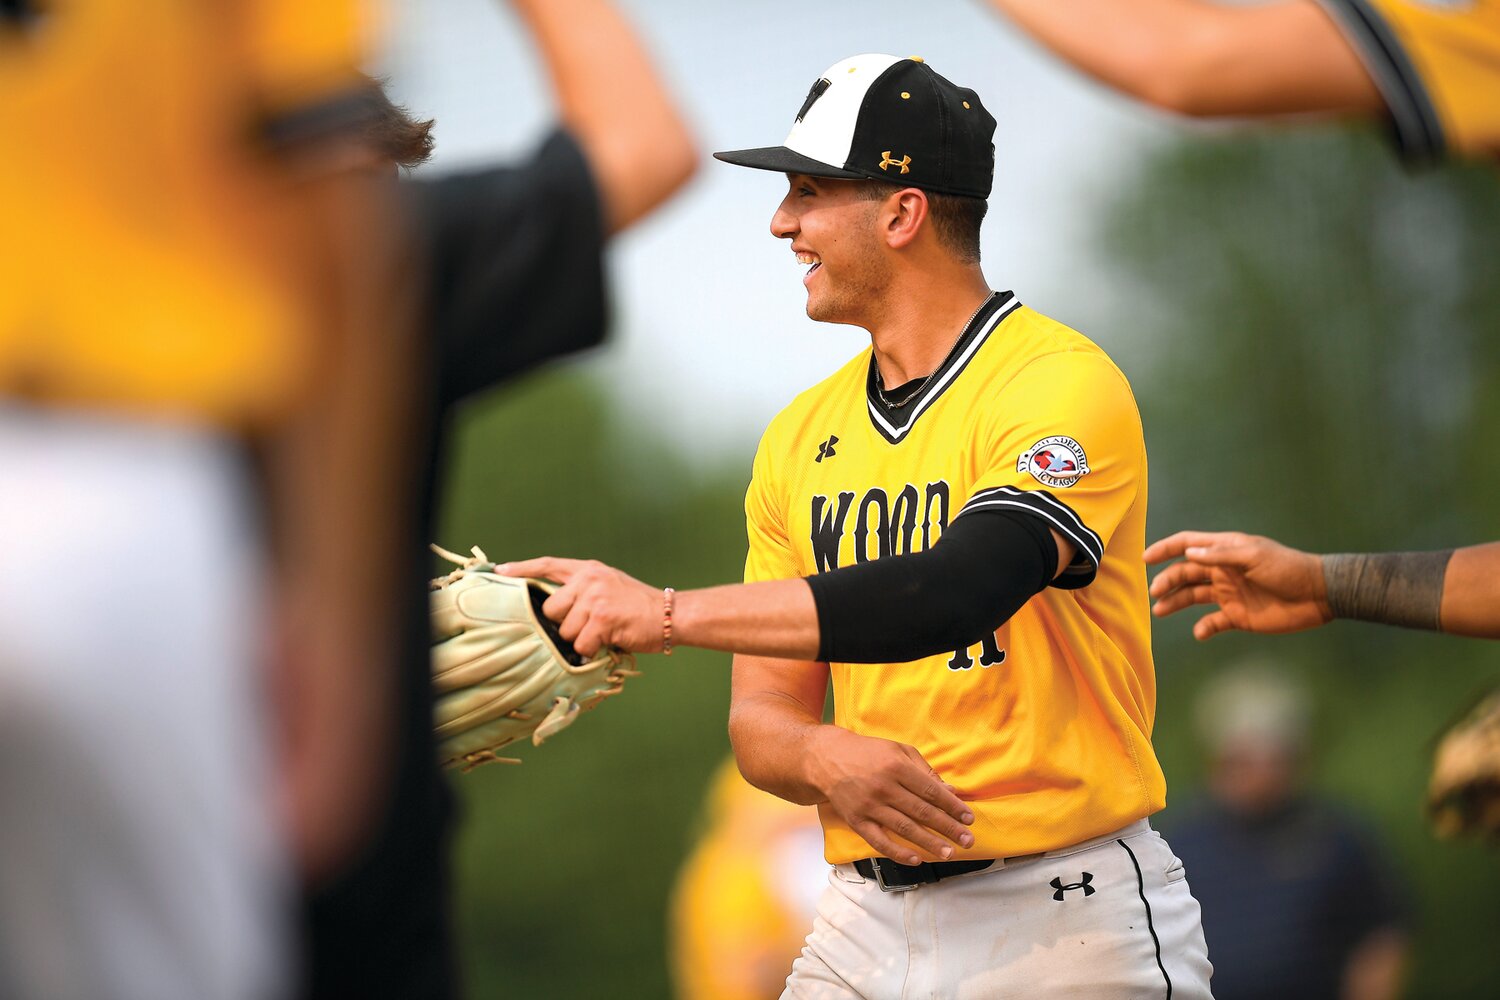 Archbishop Wood pitcher Joey Gale is congratulated after ending the second inning with a strikeout.